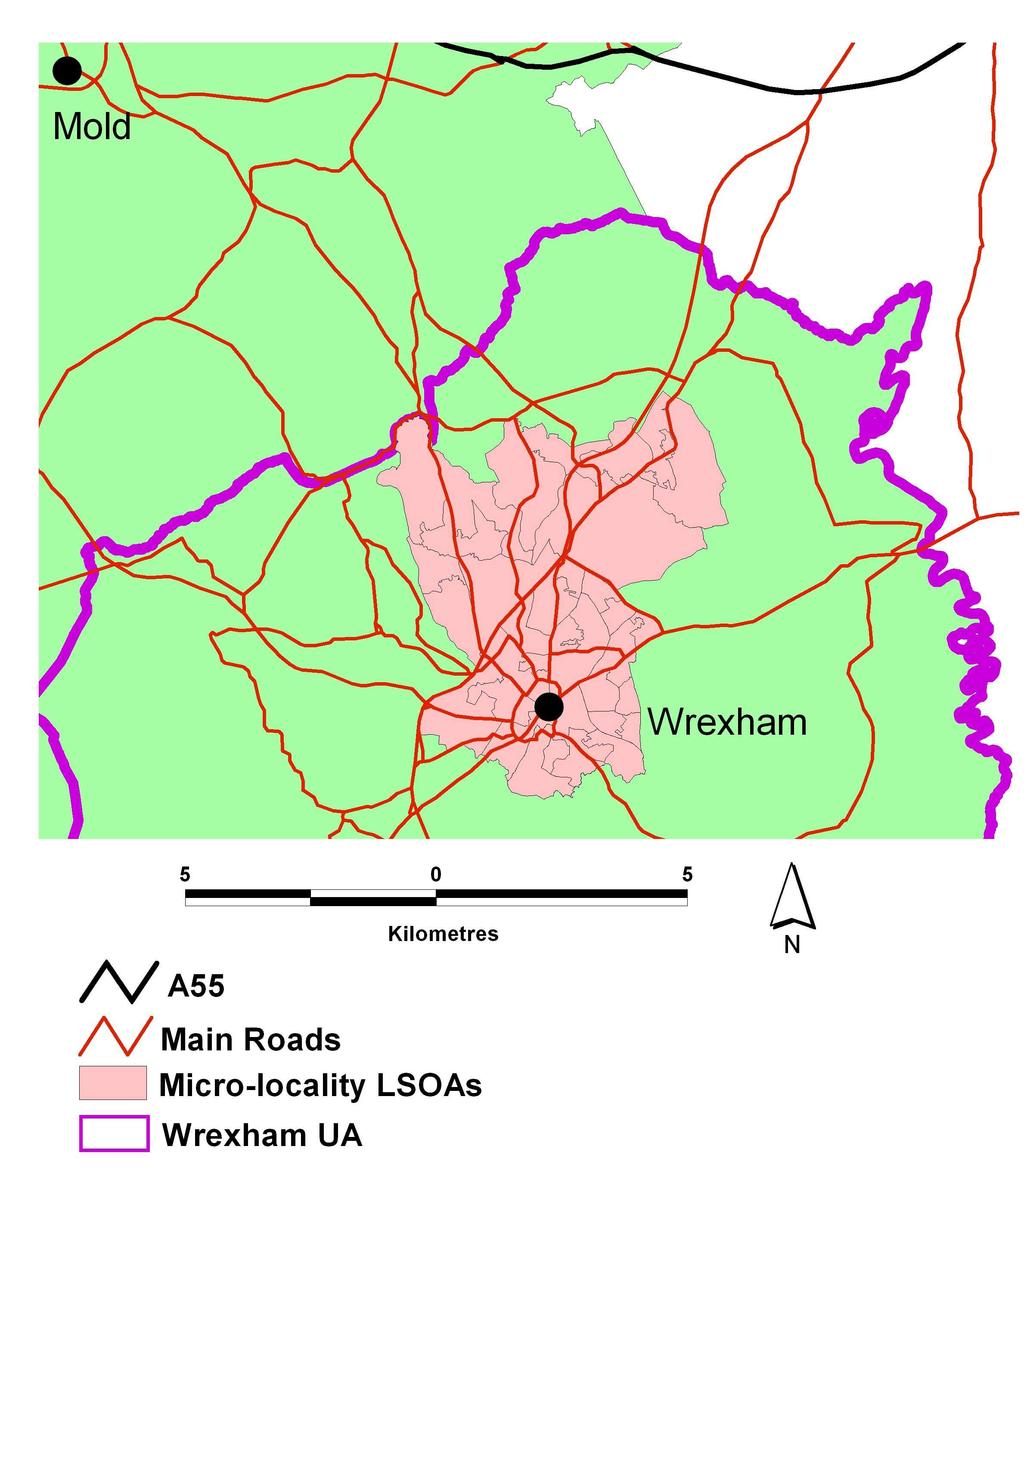 Figure 1.4 The Wrexham Micro-locality site Mastermap Layer@Crown Copyright / database right Ordnance Survey / EDINA supplied service 2010.